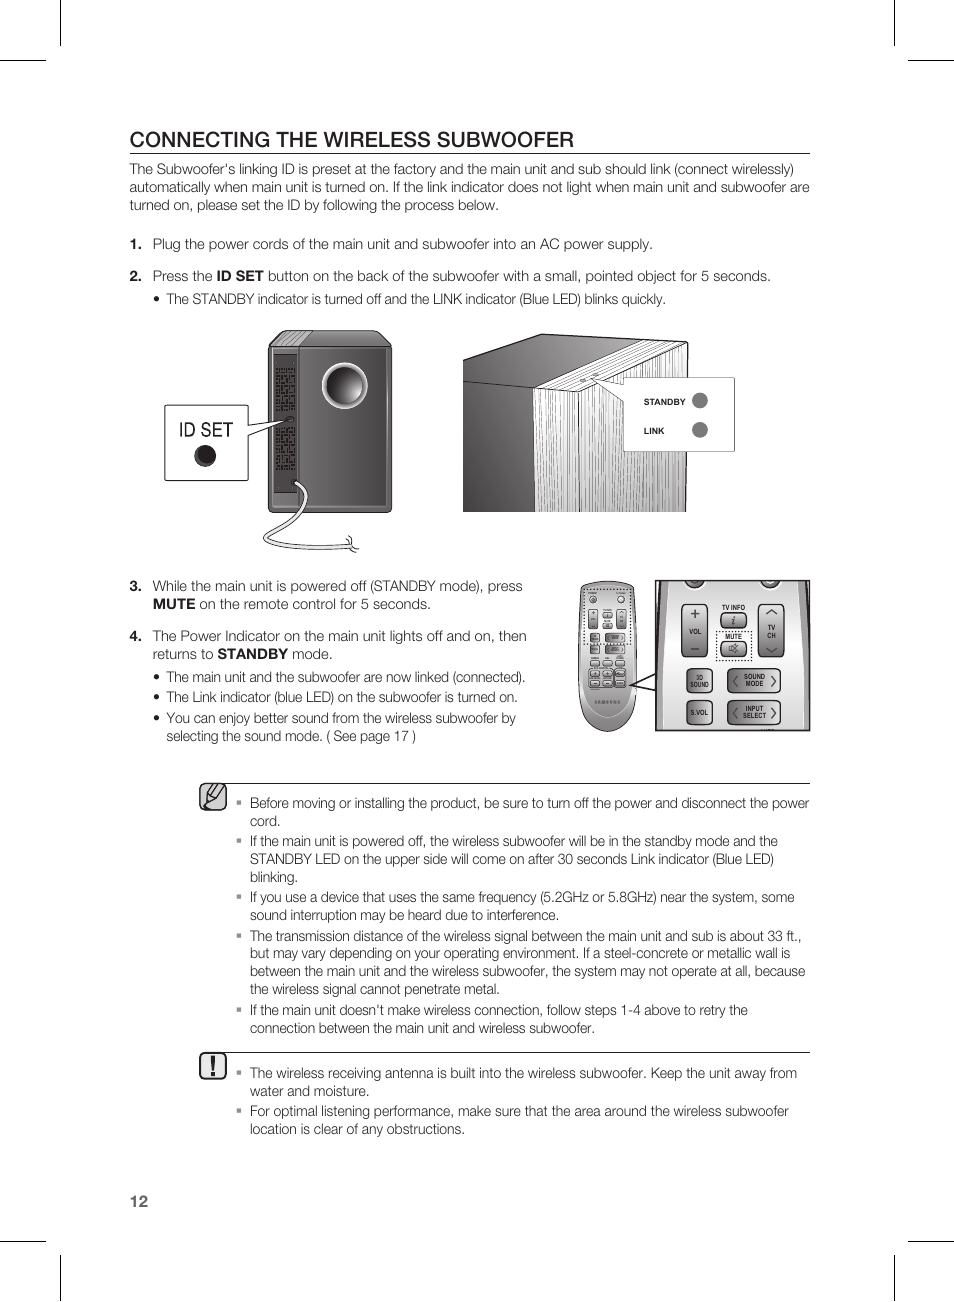 Connecting the wireless subwoofer | Samsung HW-D450-ZA User Manual | Page  12 / 24 | Original mode